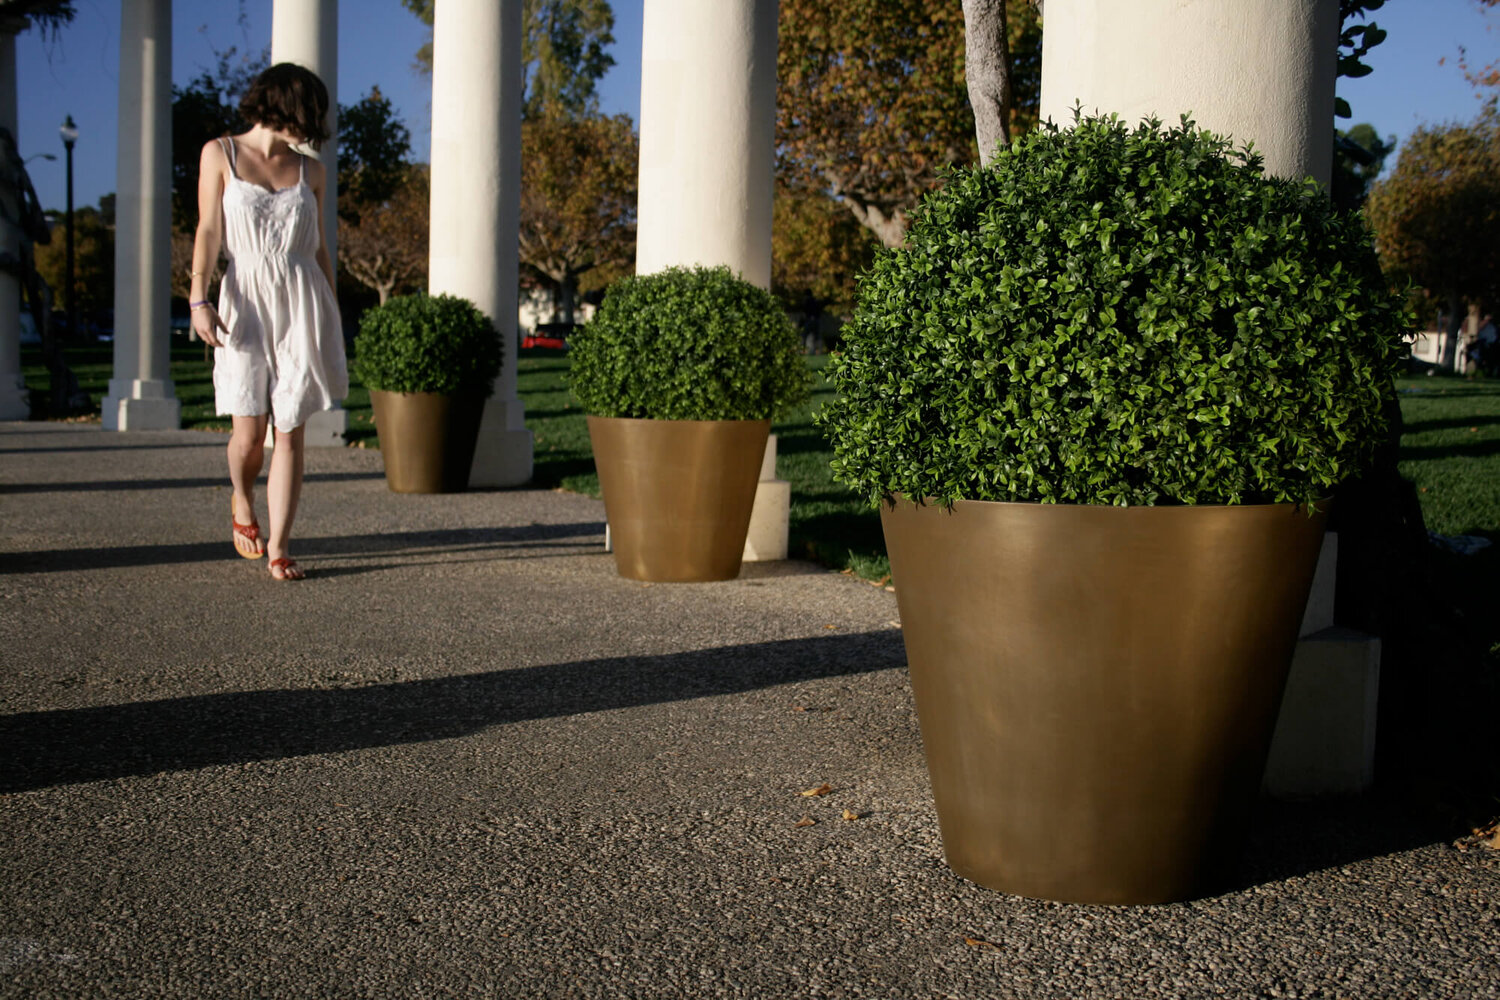 Stylish woman walking by large planters with small shrubbery in them.